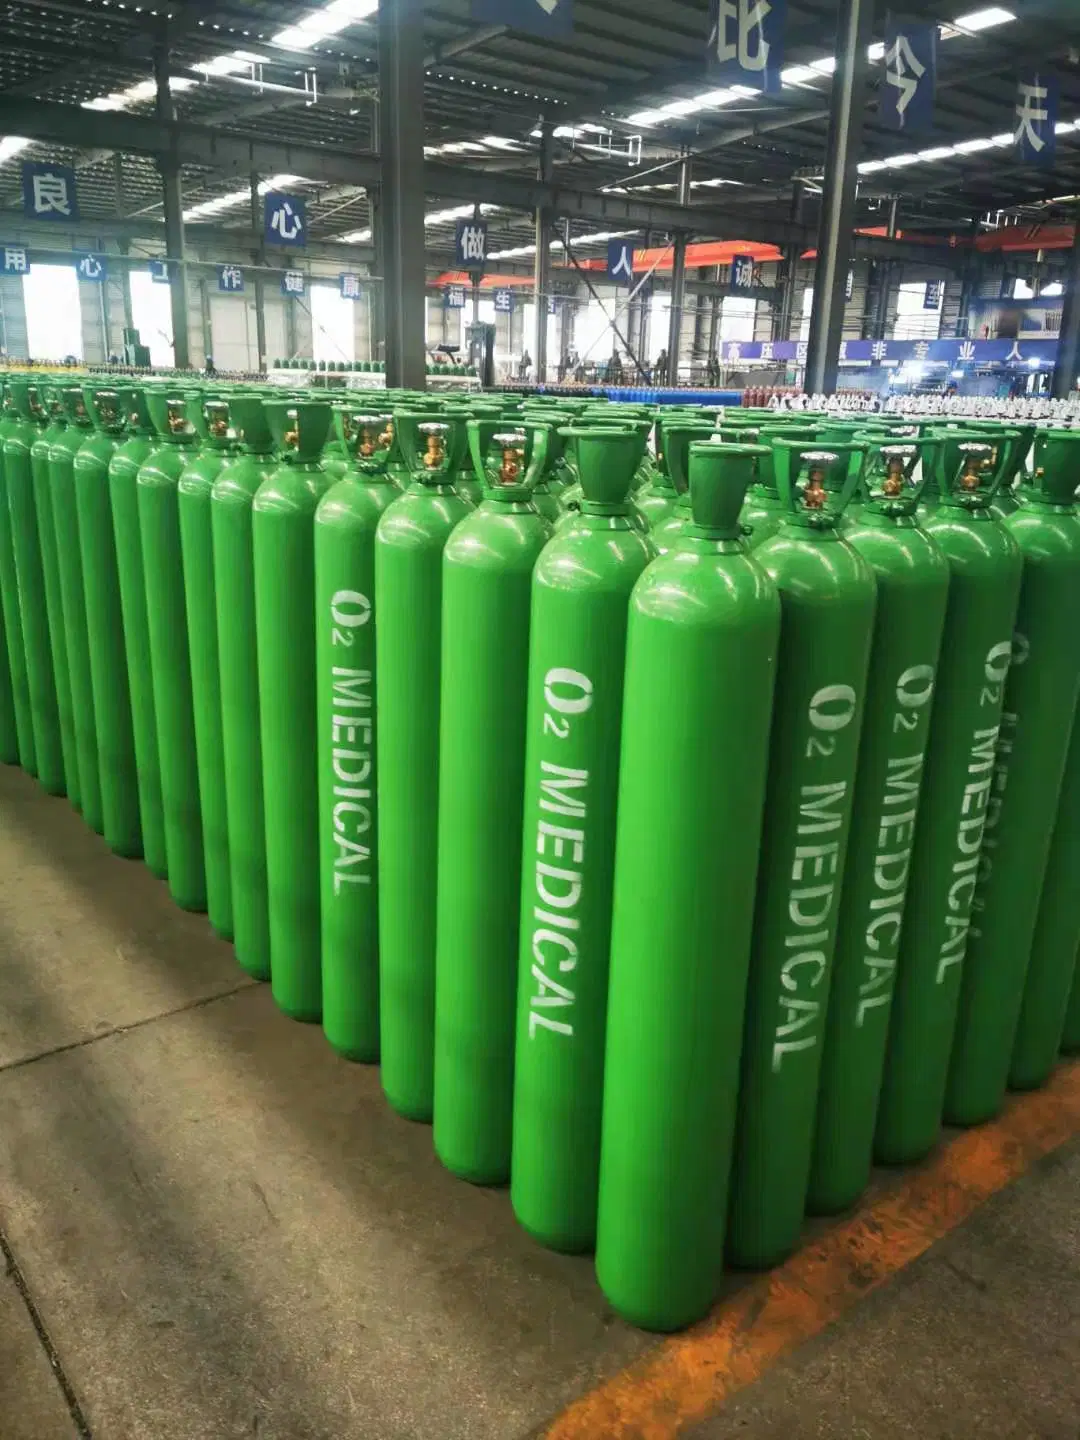 47L Seamless Steel Industrial and Medical Oxygen Gas Cylinder with TUV Test Report